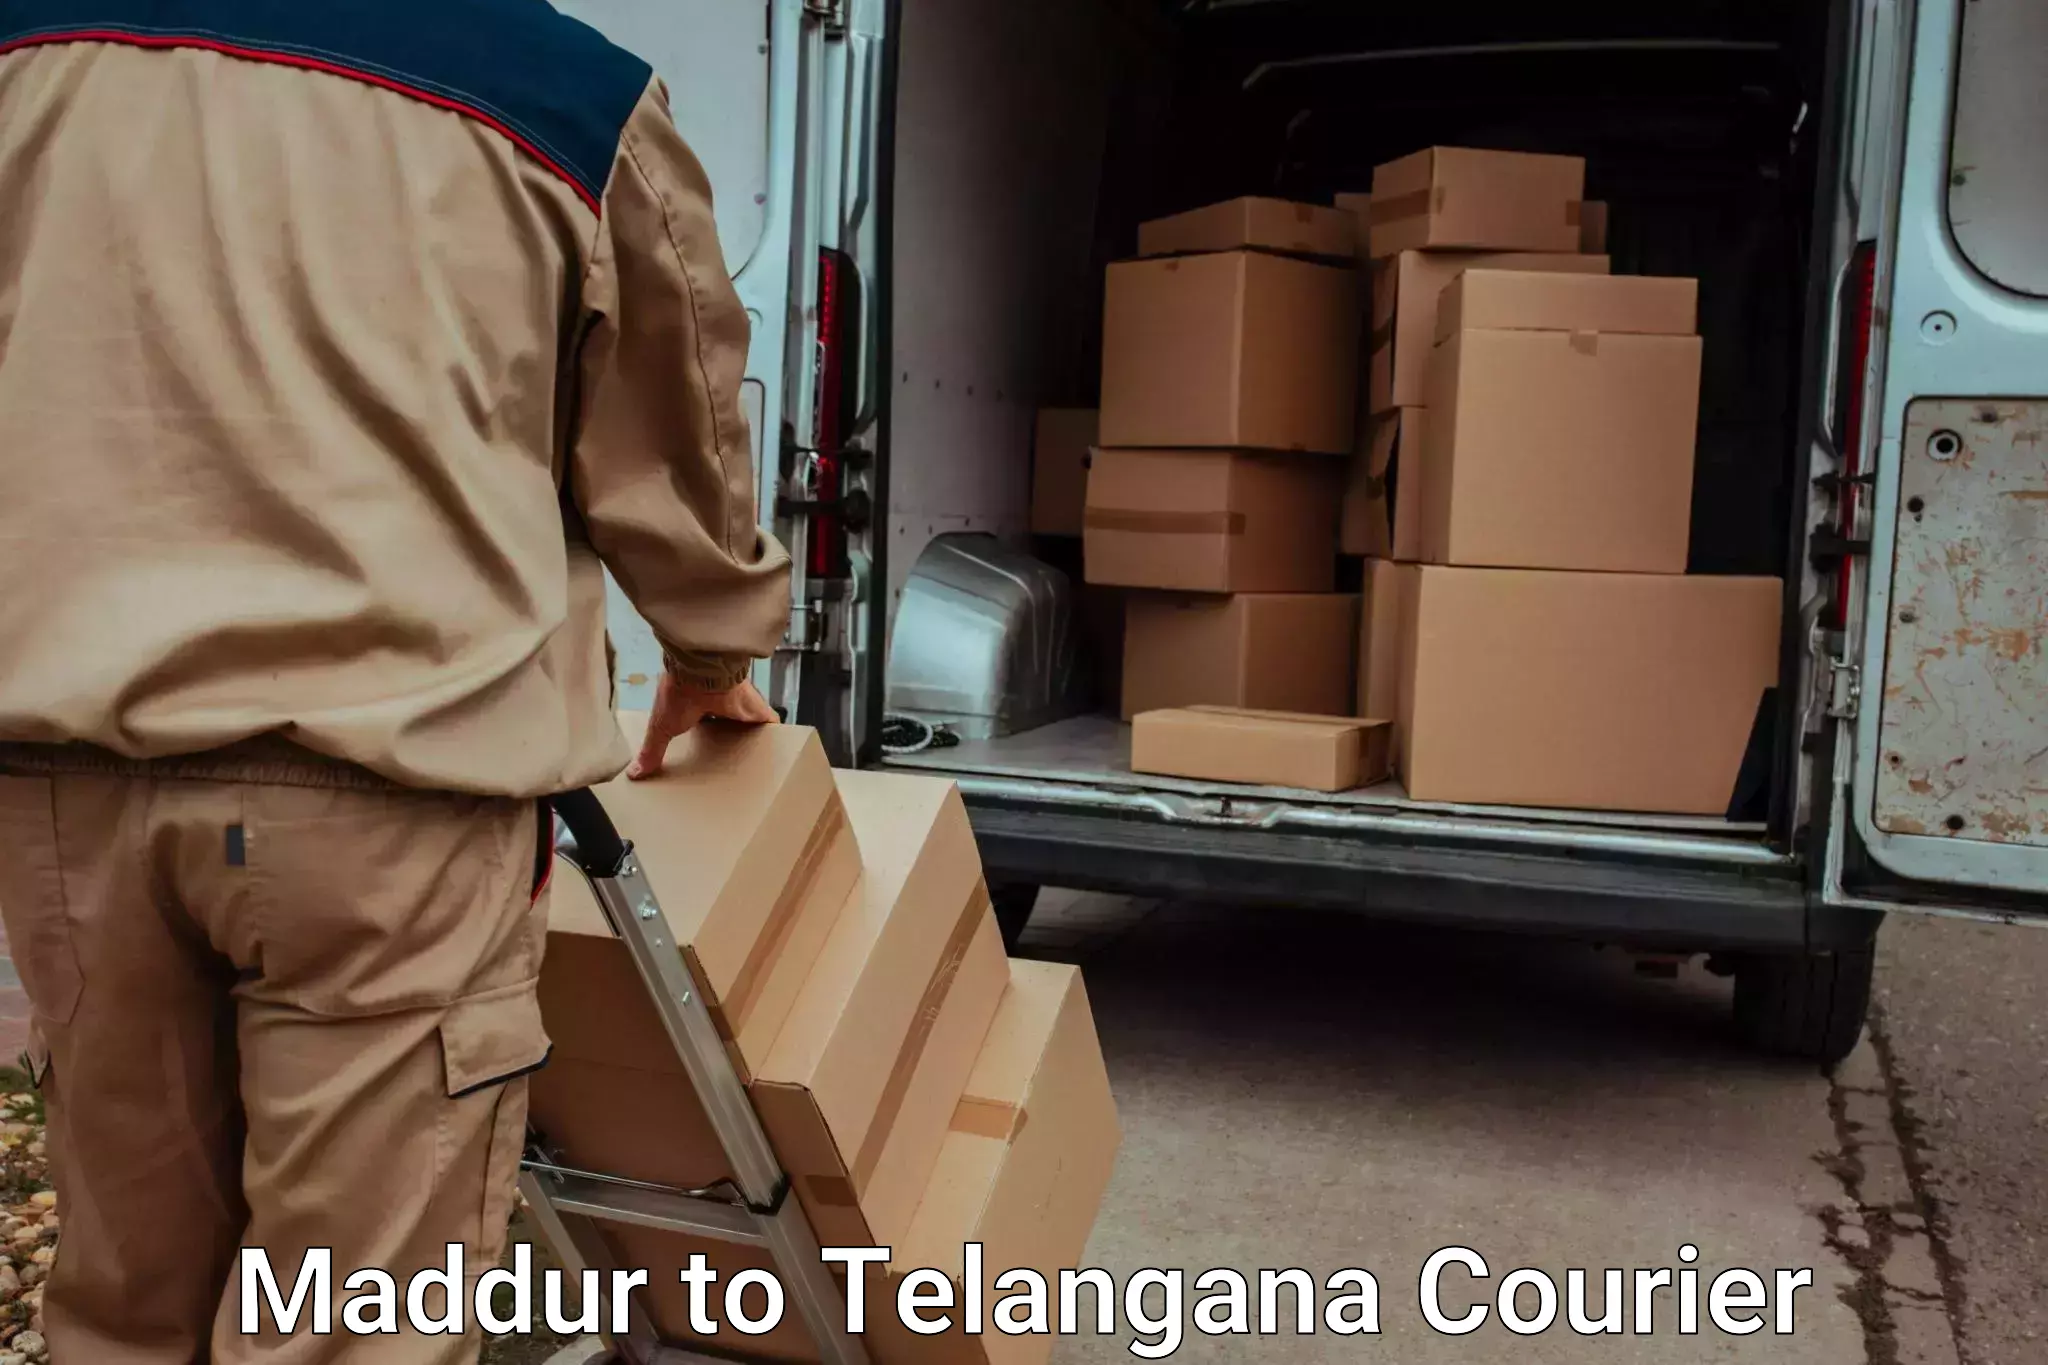 Luggage delivery network Maddur to Hyderabad